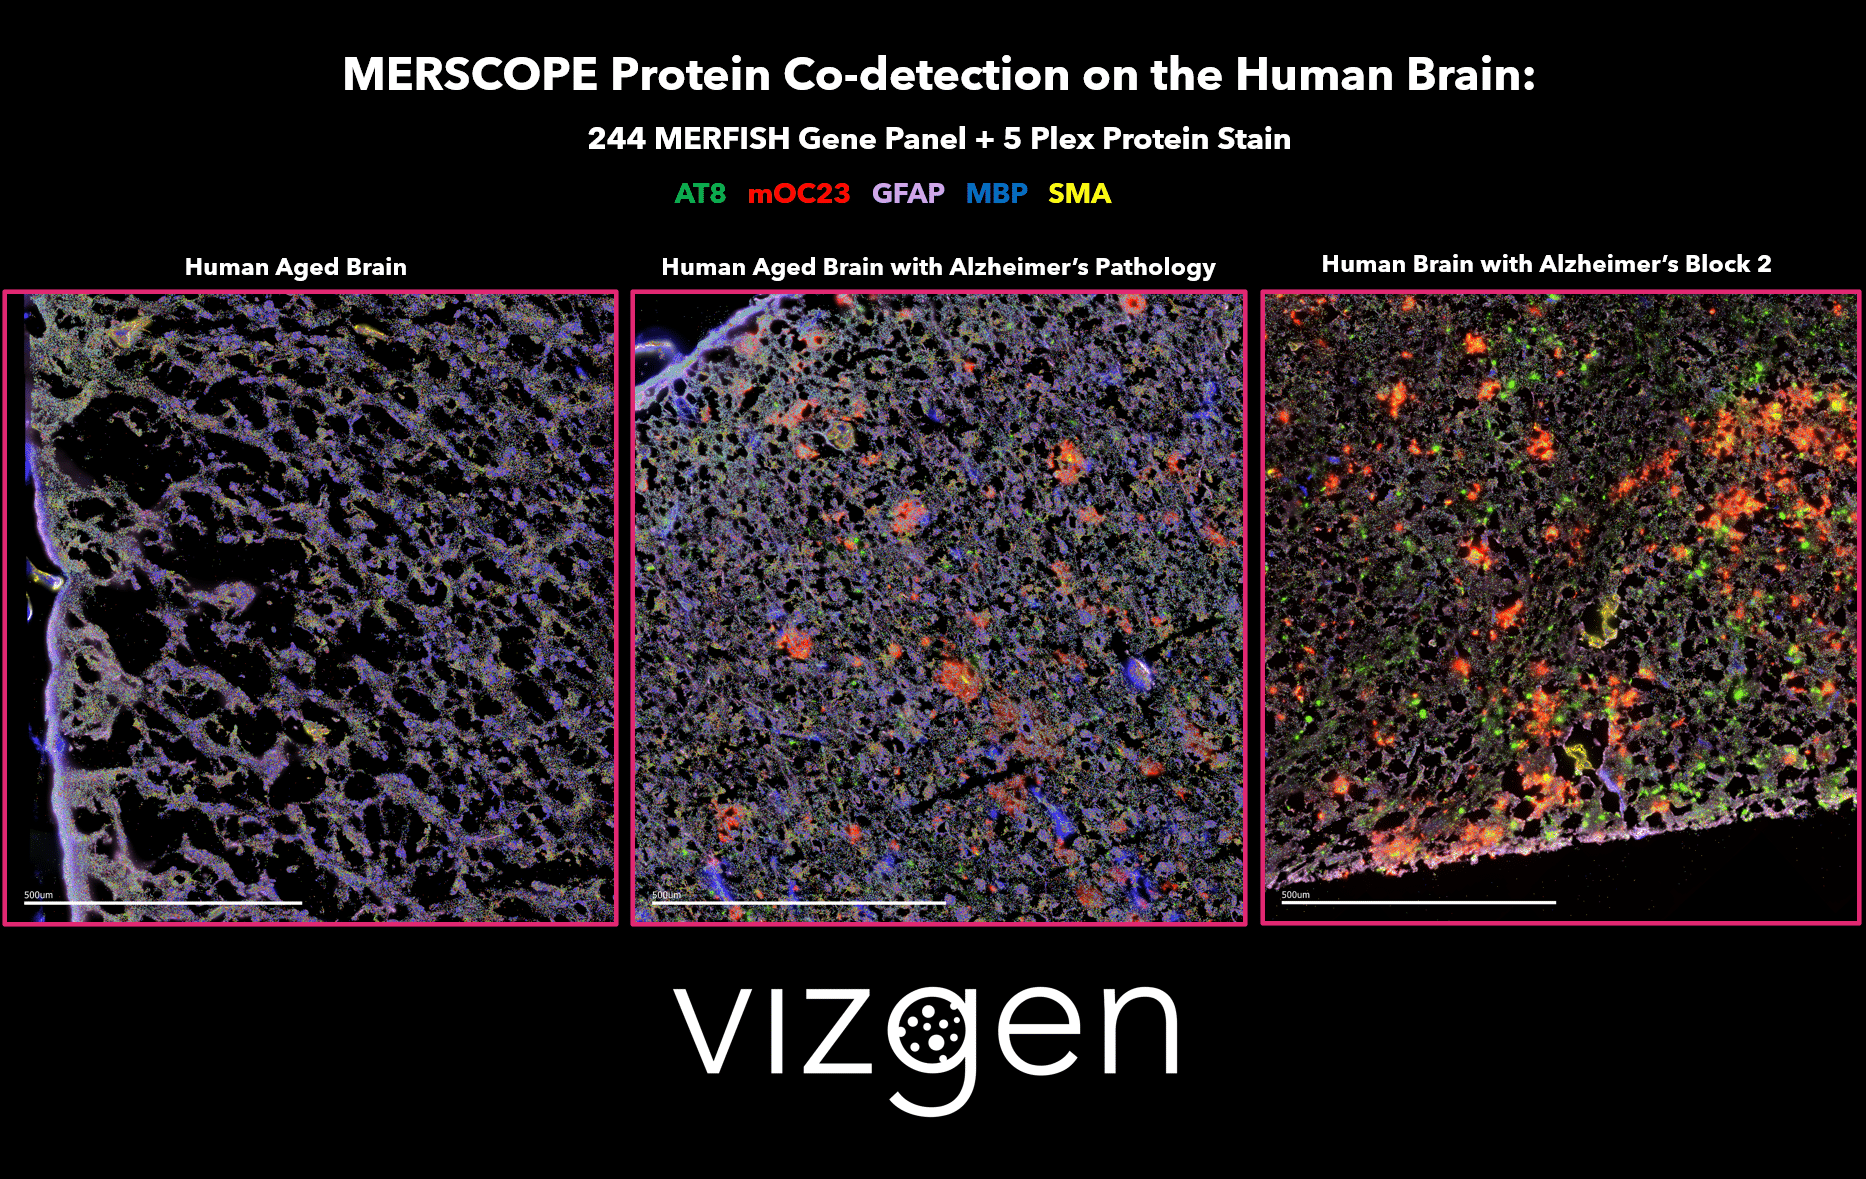 MERSCOPE Data Image showing the spatial multiomic differences between a normal human aged brain, and human brains with Alzheimer’s disease. The data image shows the spatial distribution of detected transcripts from 244 genes and 5 co-detected proteins across intact human brain tissue samples.